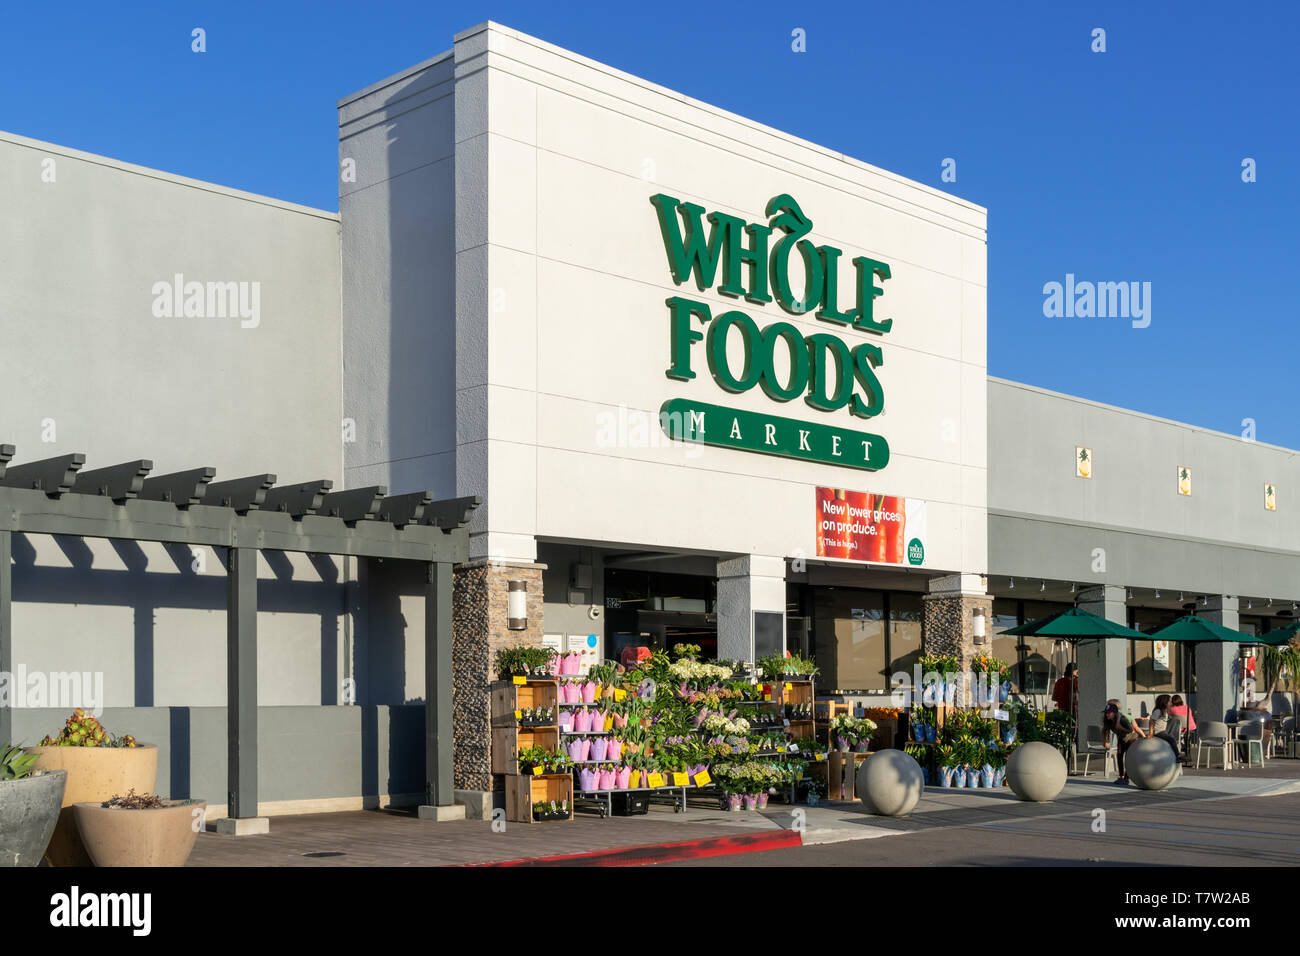 LA JOLLA,CA/USA APRIL 12, 2019: Whole Foods Market exterior and logo. Whole Foods Market Inc. is an American supermarket chain. Stock Photo